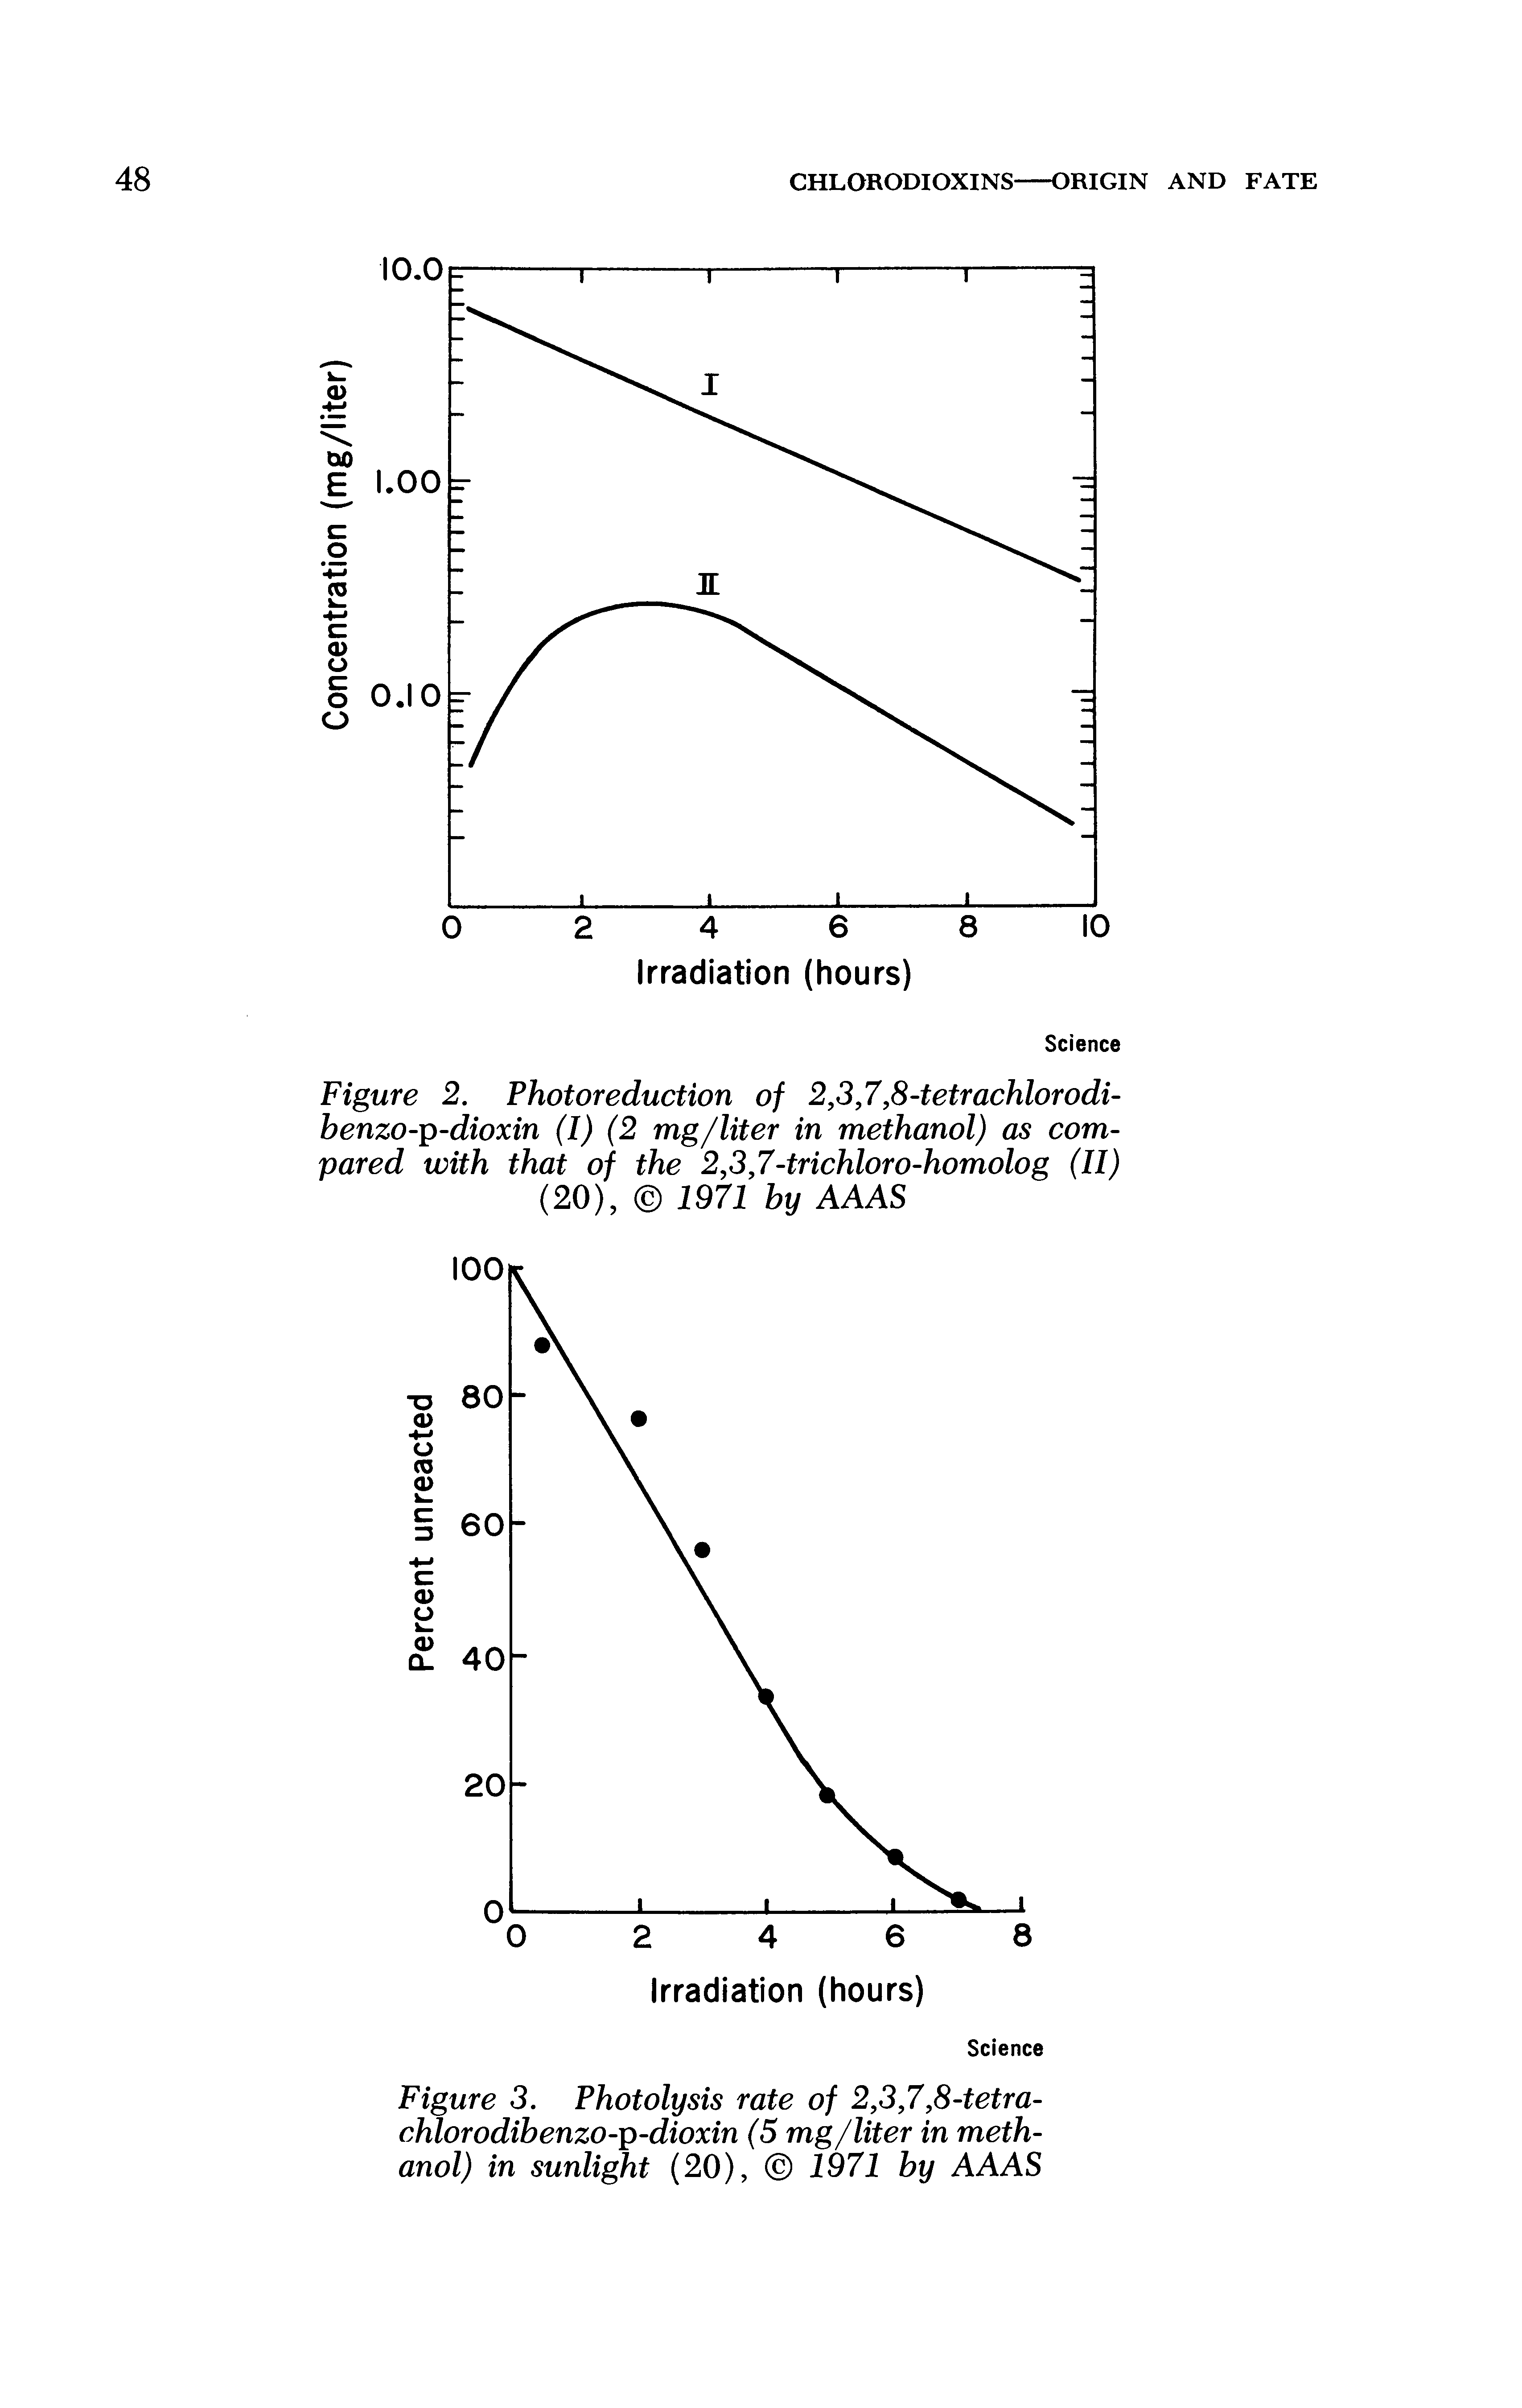 Figure 2. Photoreduction of 2,3,7,8-tetrachlorodi-benzo- -dioxin (I) (2 mg/liter in methanol) as compared with that of the 2,3,7-trichloro-homolog (II) (20), 1971 by AAAS...